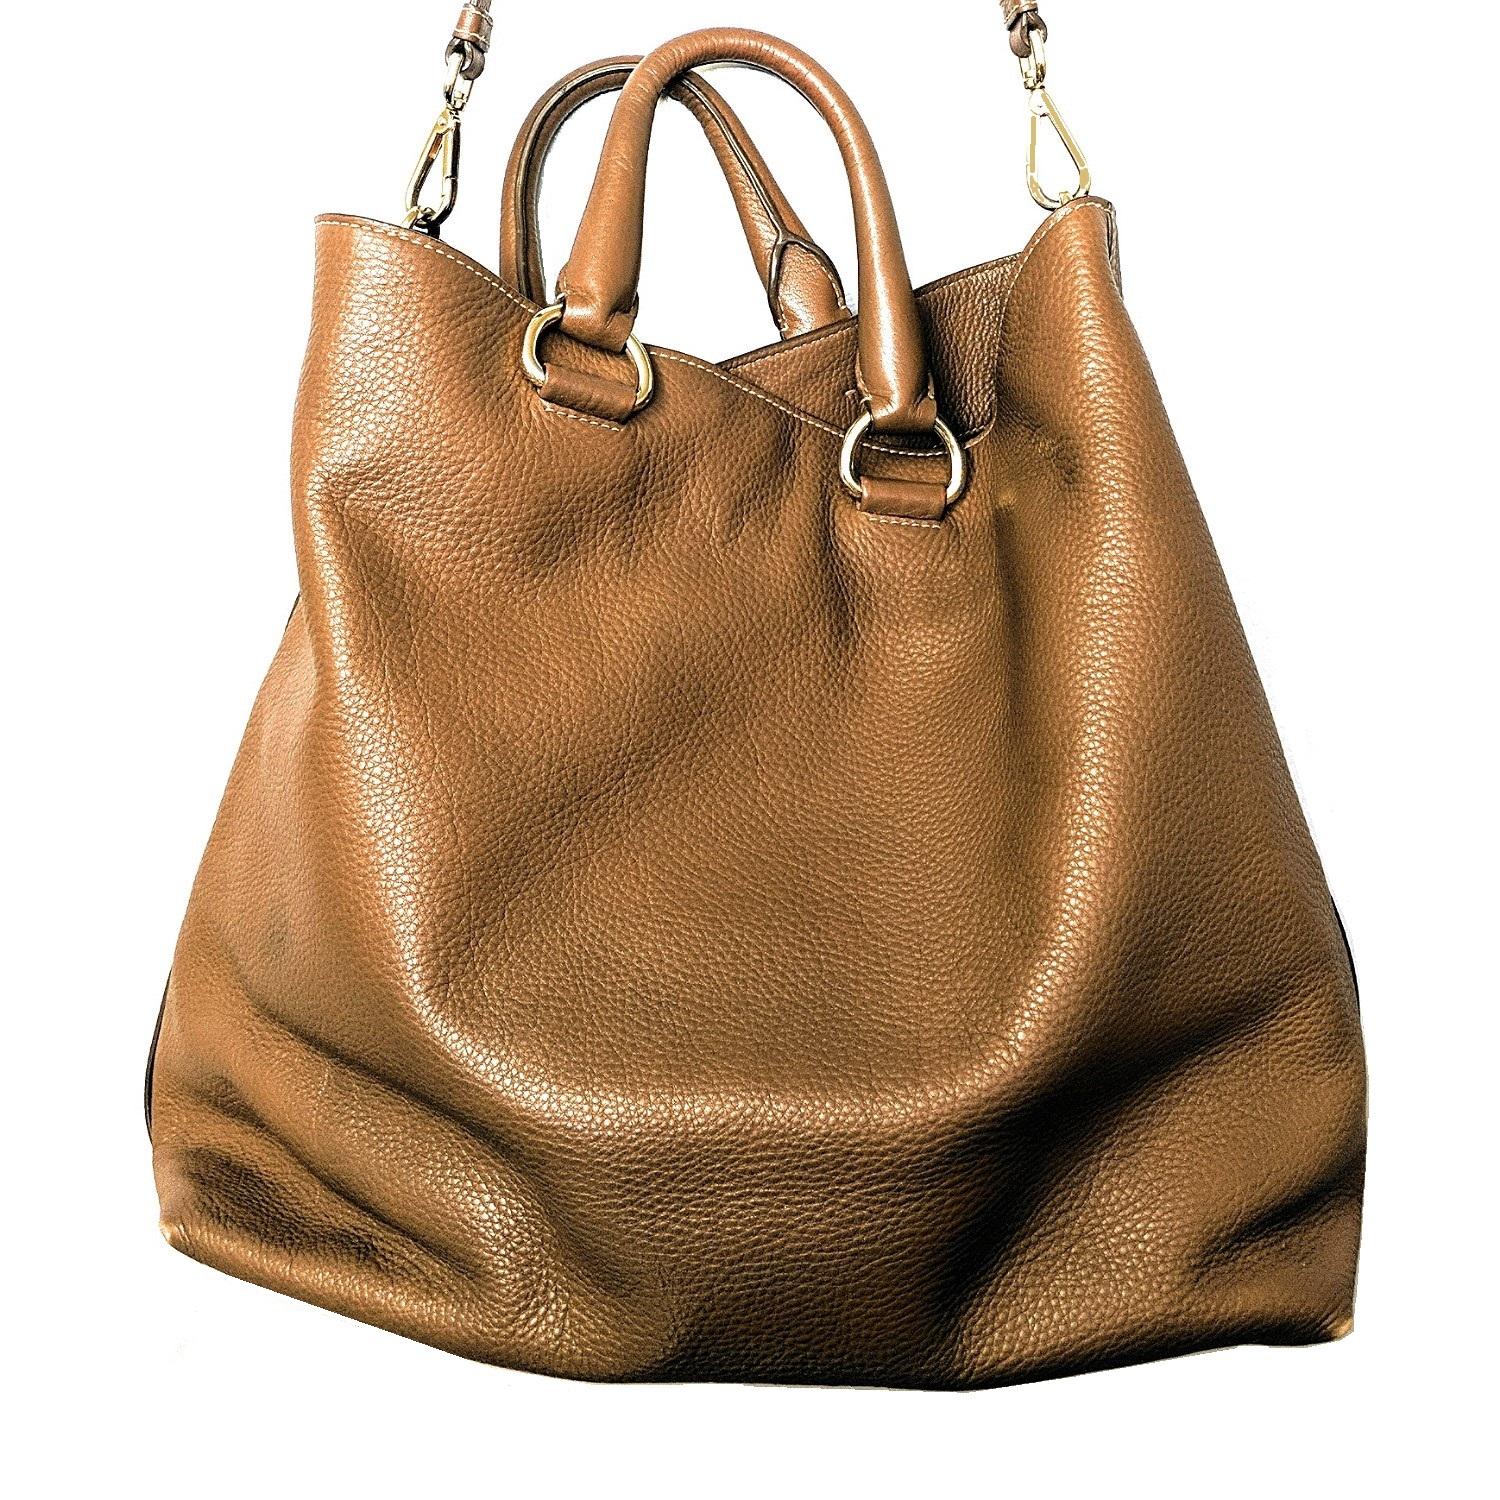 This stylish tote is crafted of finely textured brown vitello daino calfskin leather. The bag features leather rolled top handles with polished brass hardware and an optional shoulder strap. The top opens to a wide and spacious matching Prada